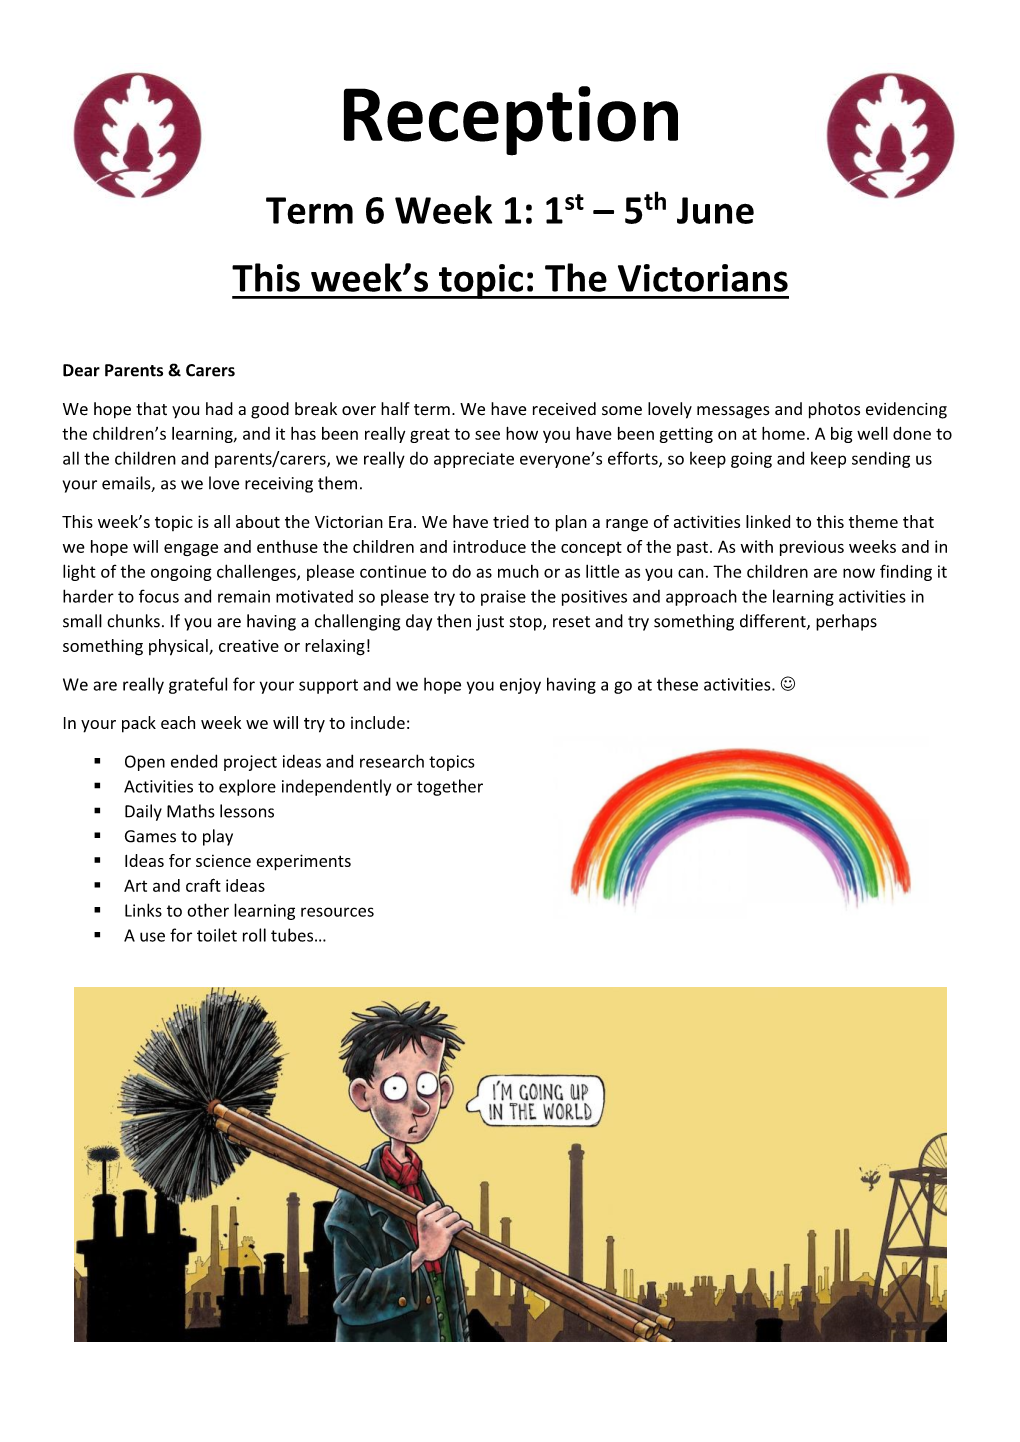 Reception Term 6 Week 1: 1St – 5Th June This Week’S Topic: the Victorians